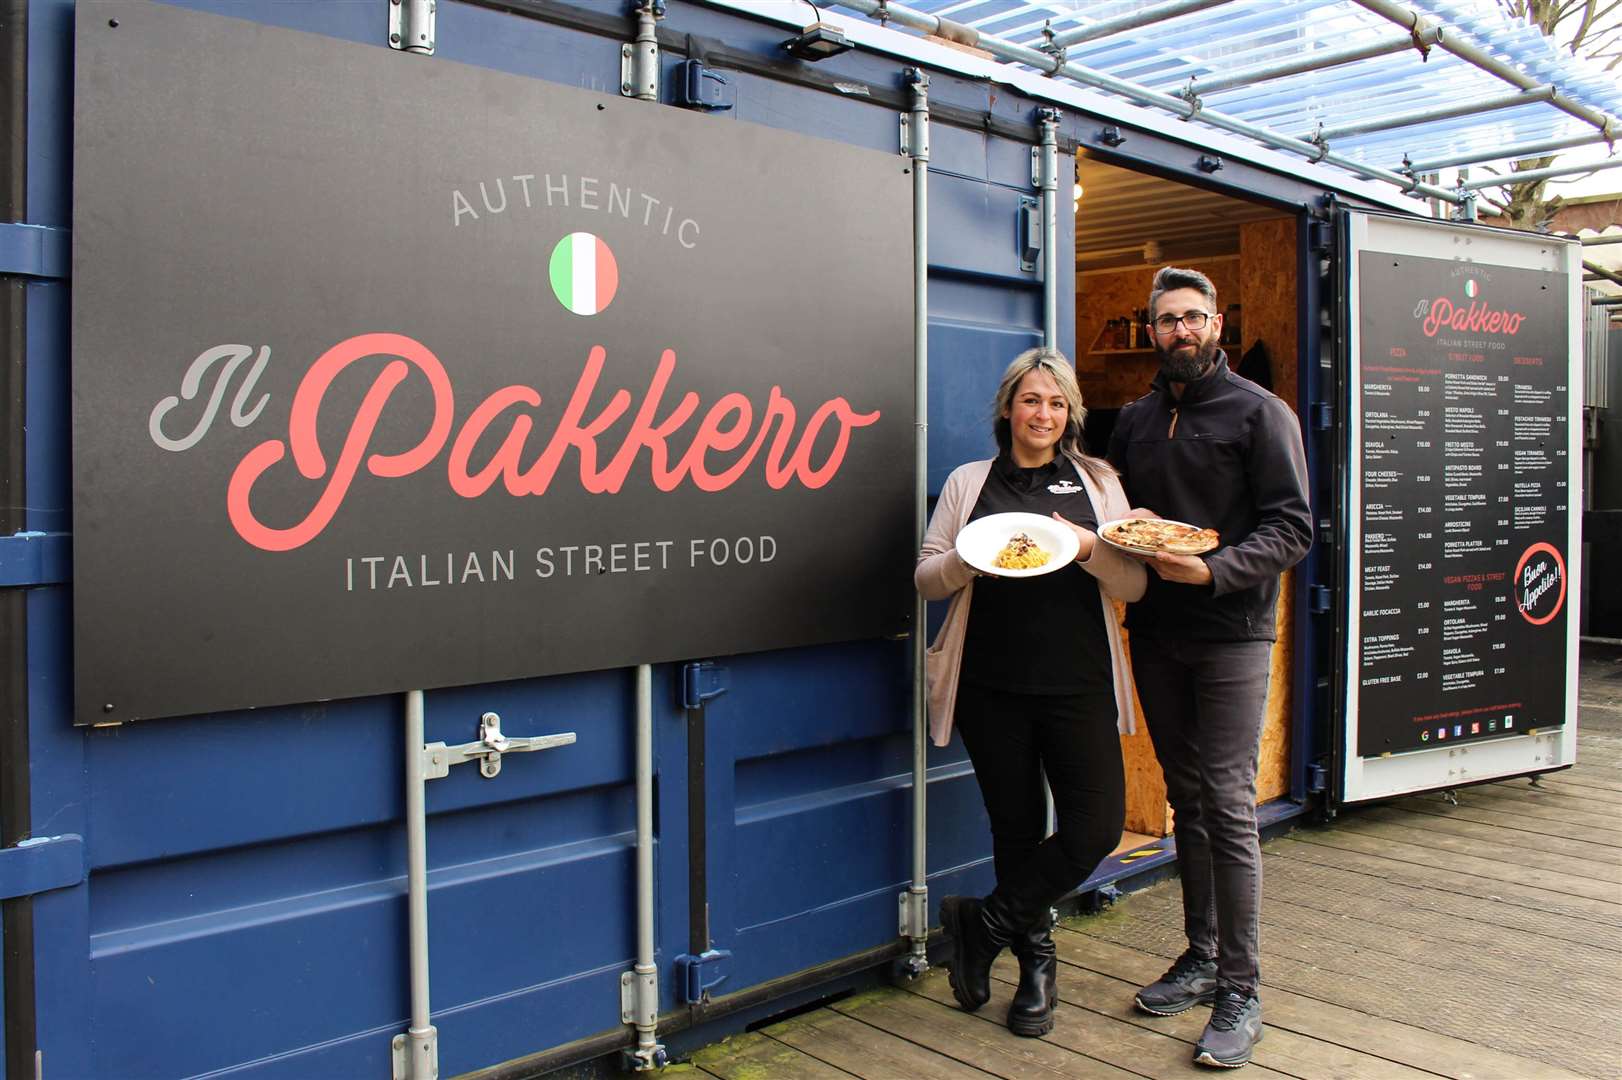 Fran and Jac Meli own two eateries at Coachworks in Ashford. Picture: Fran Meli